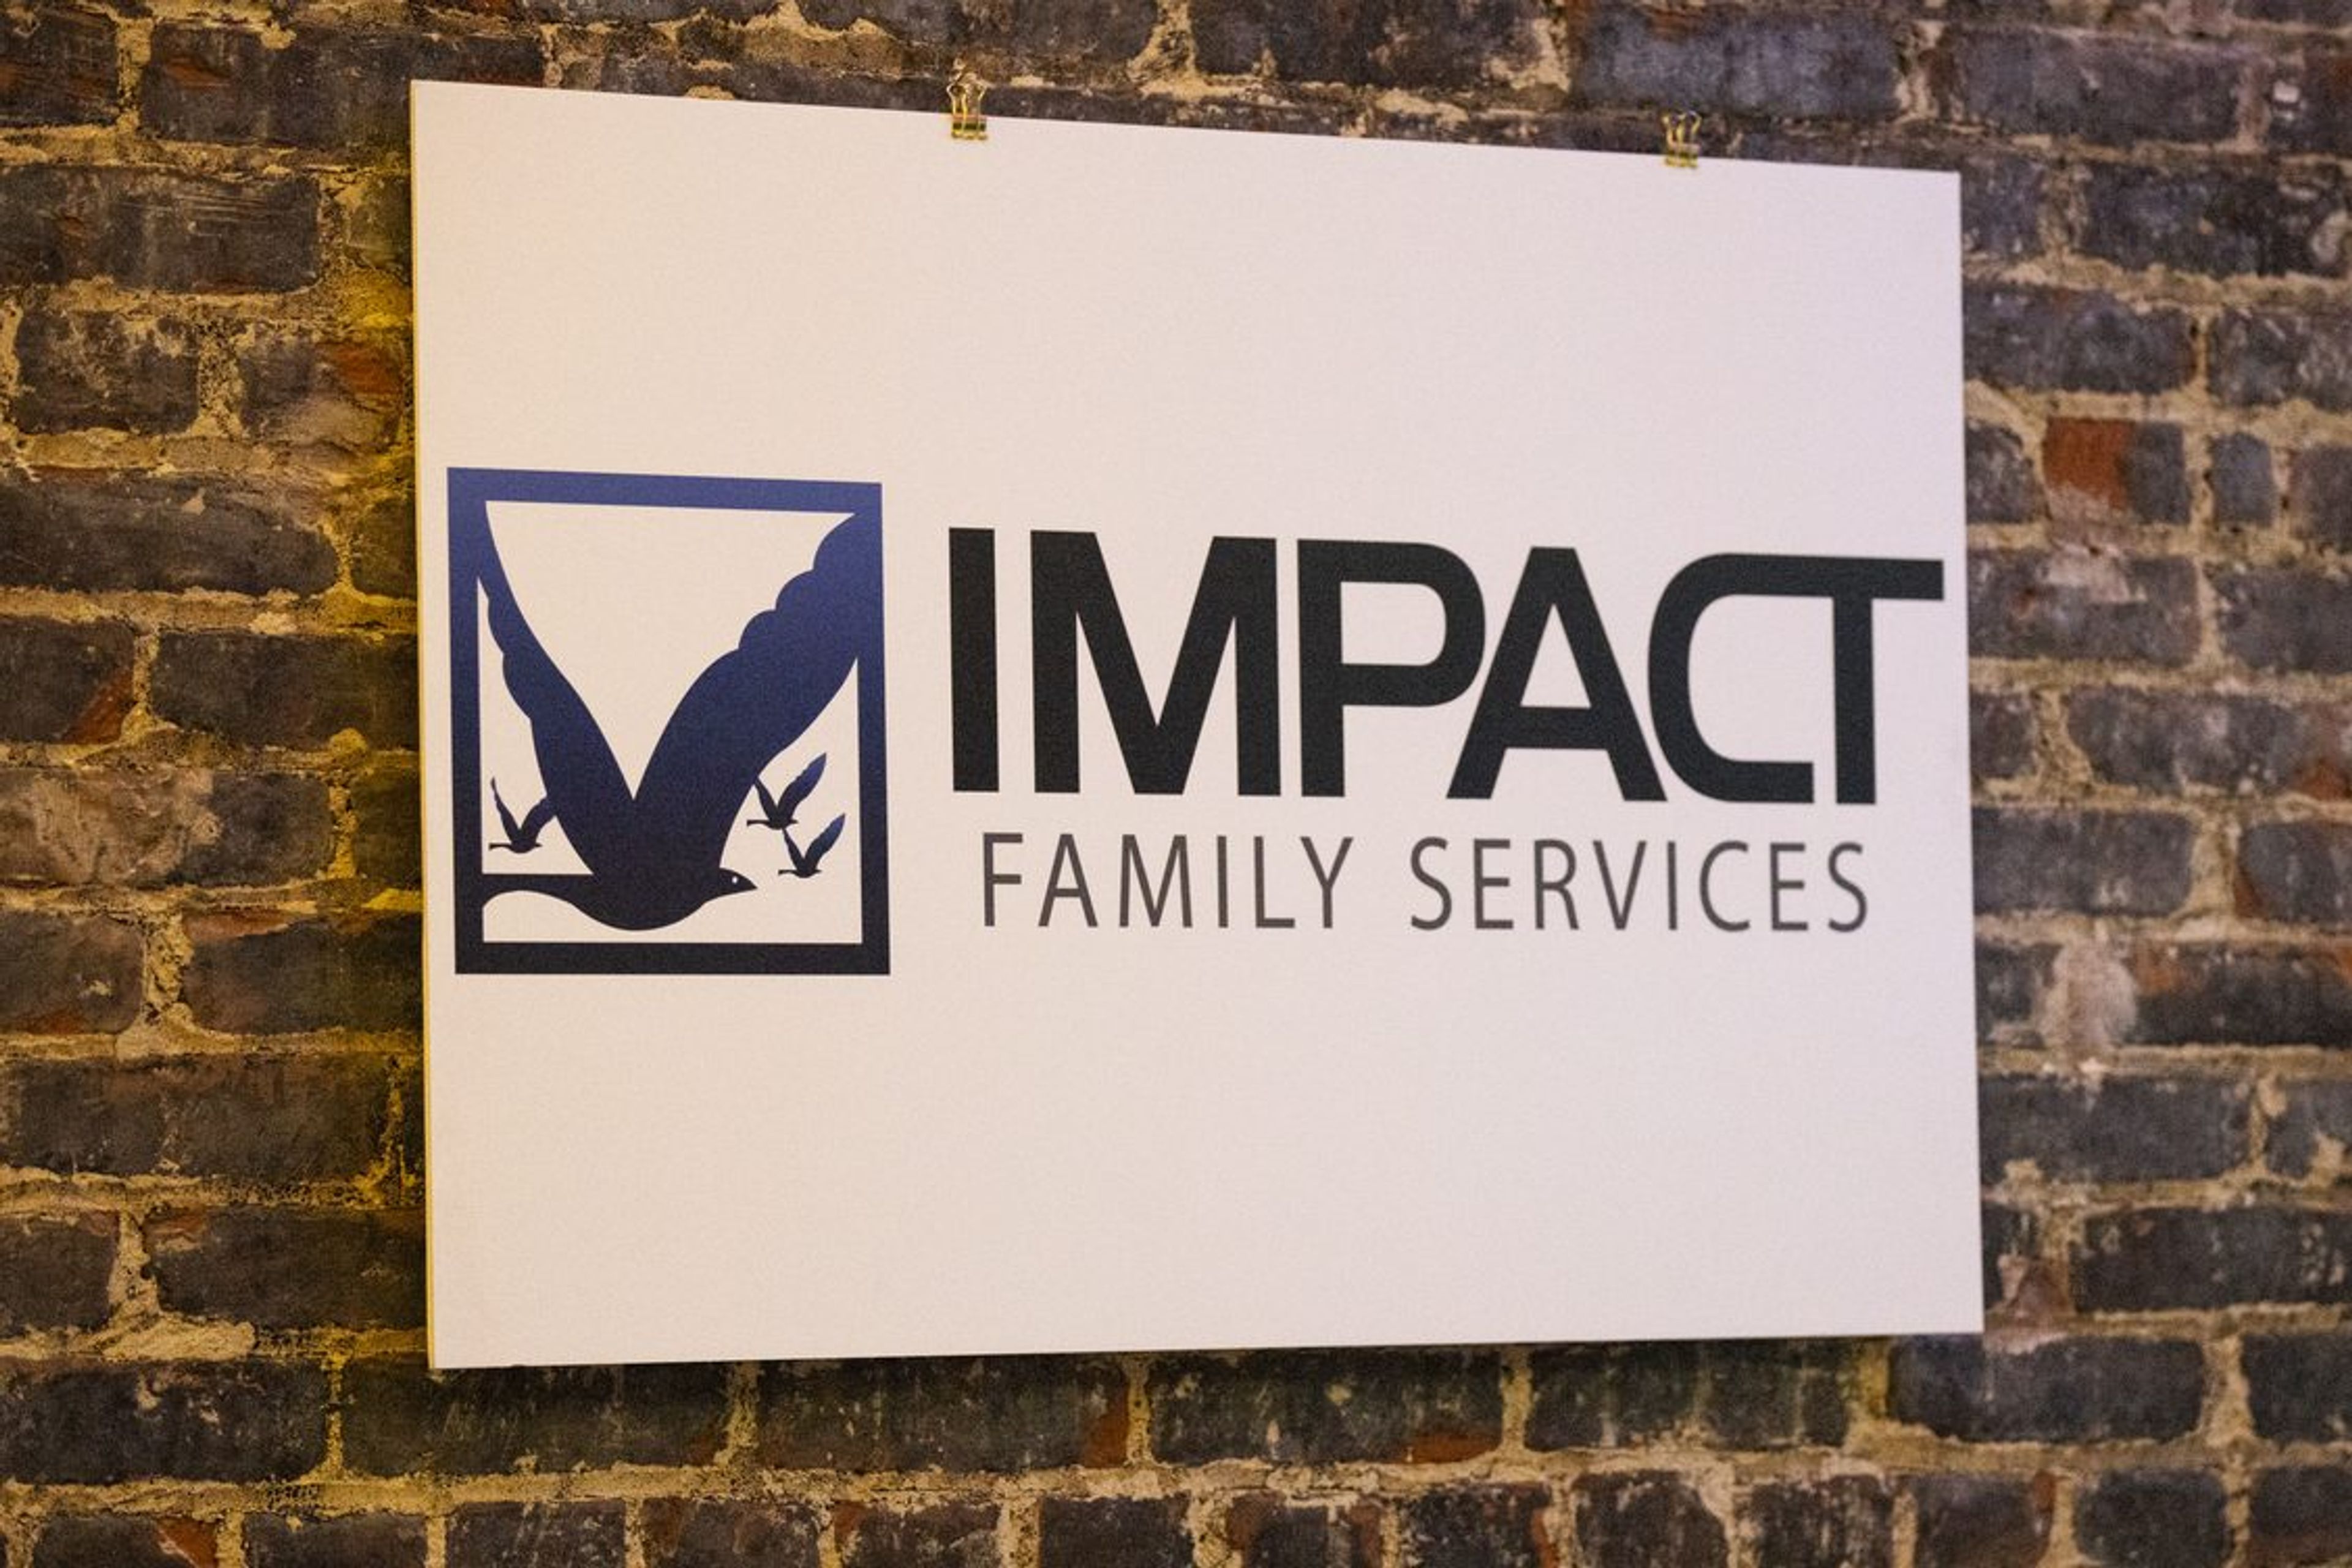 During the event a new logo for our Family Services department was unveiled.